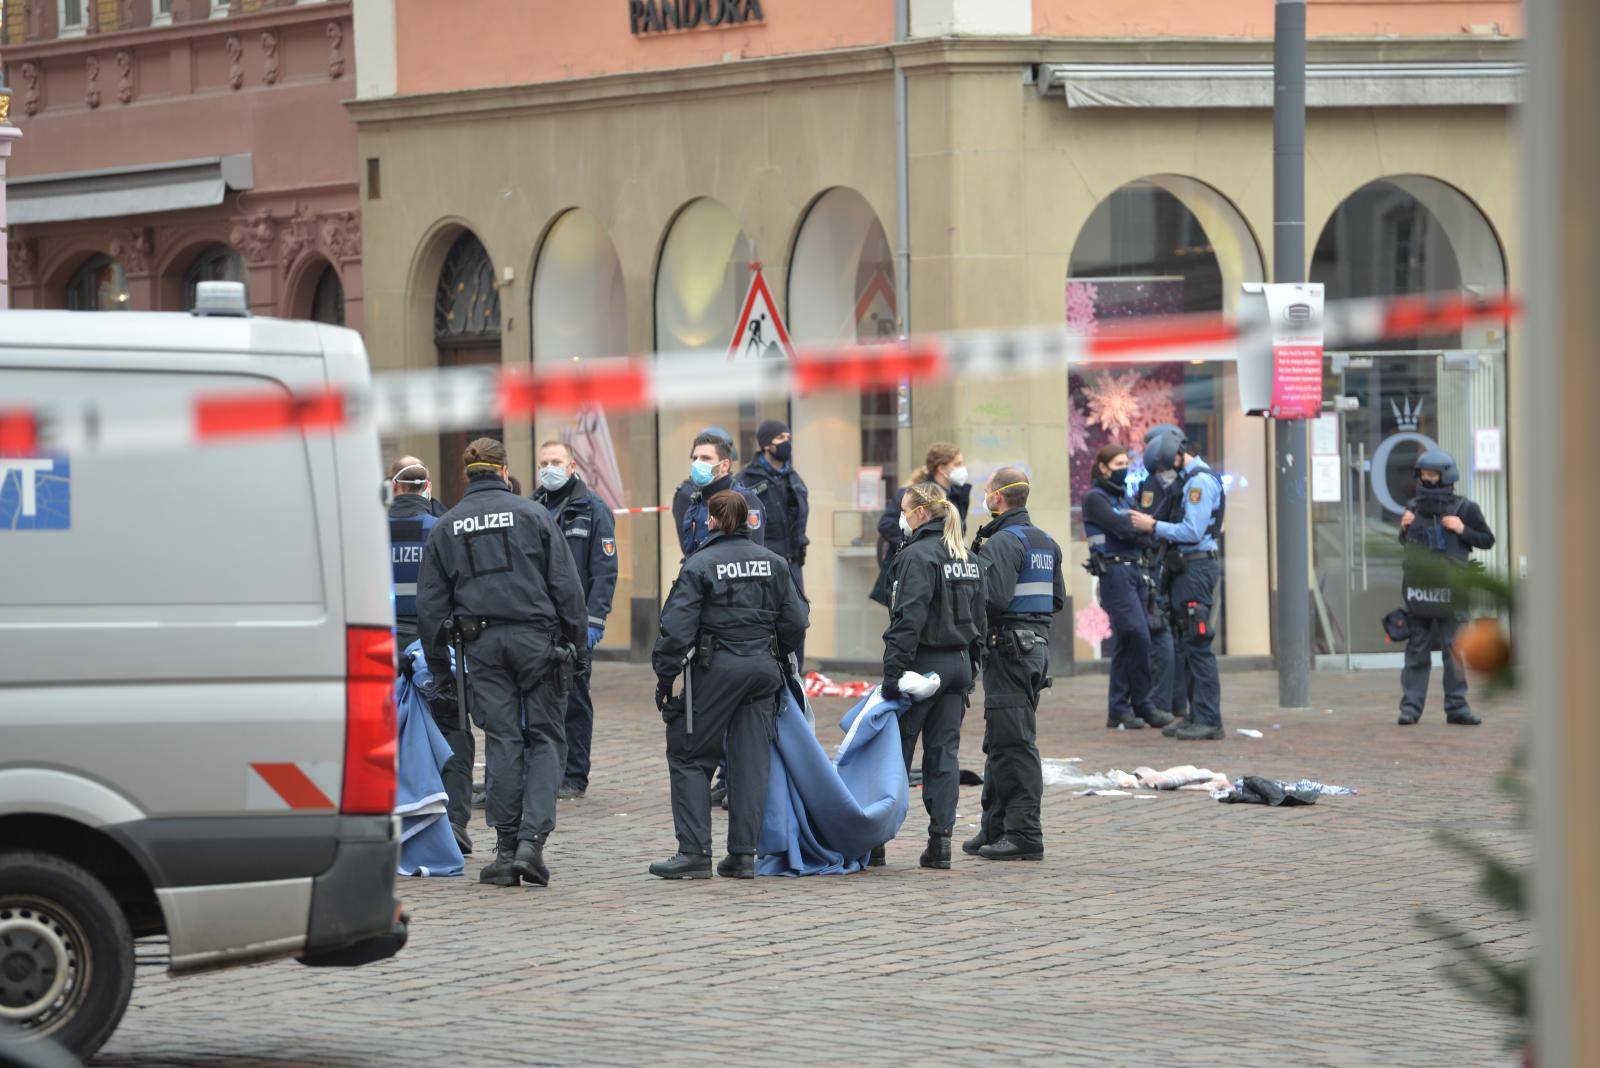 Deaths after incident with a car in downtown Trier